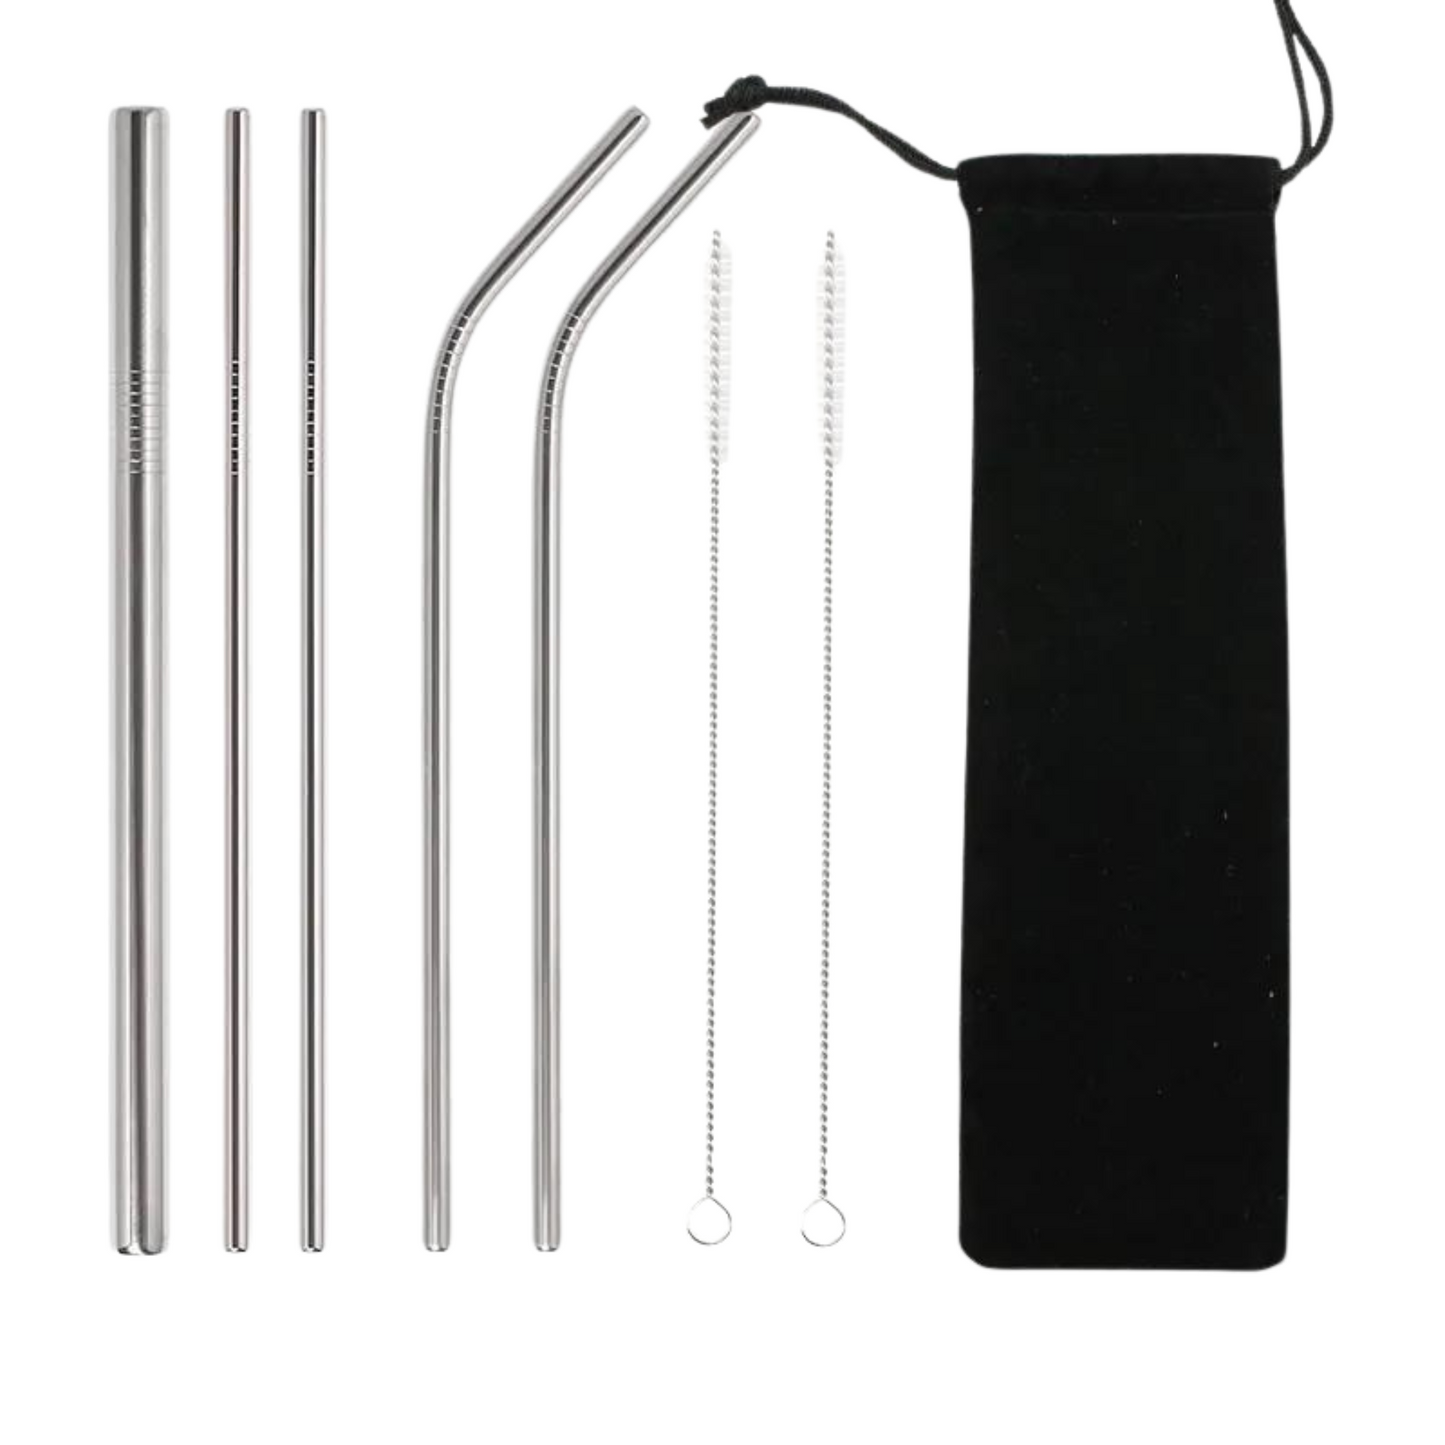 5 silver Stainless Steel Reusable Straws Set ( 1 crude 2 straight  2 bent) with Brush and bag